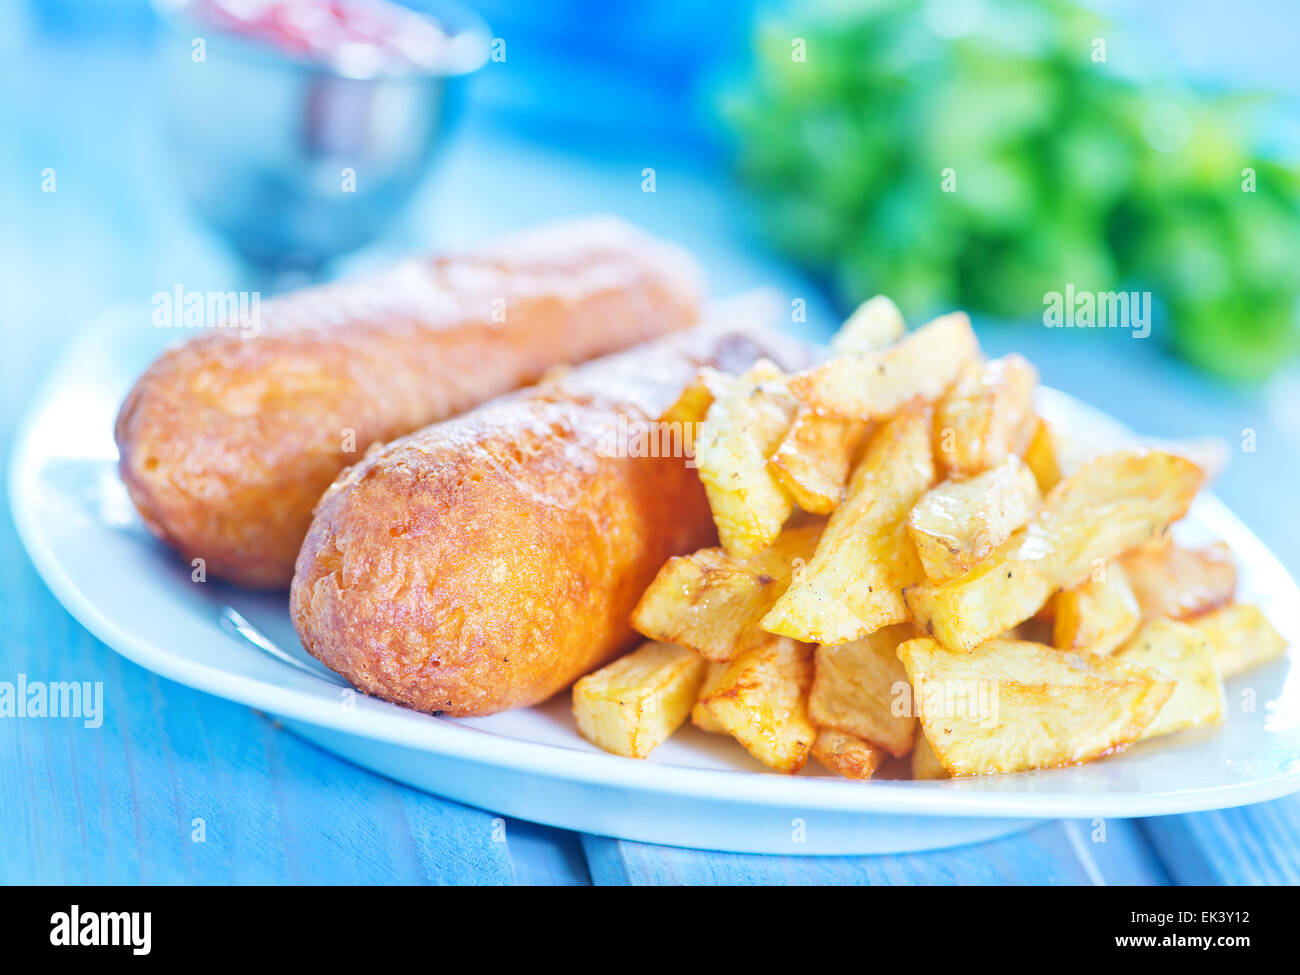 corndogs on the plate and on a table Stock Photo